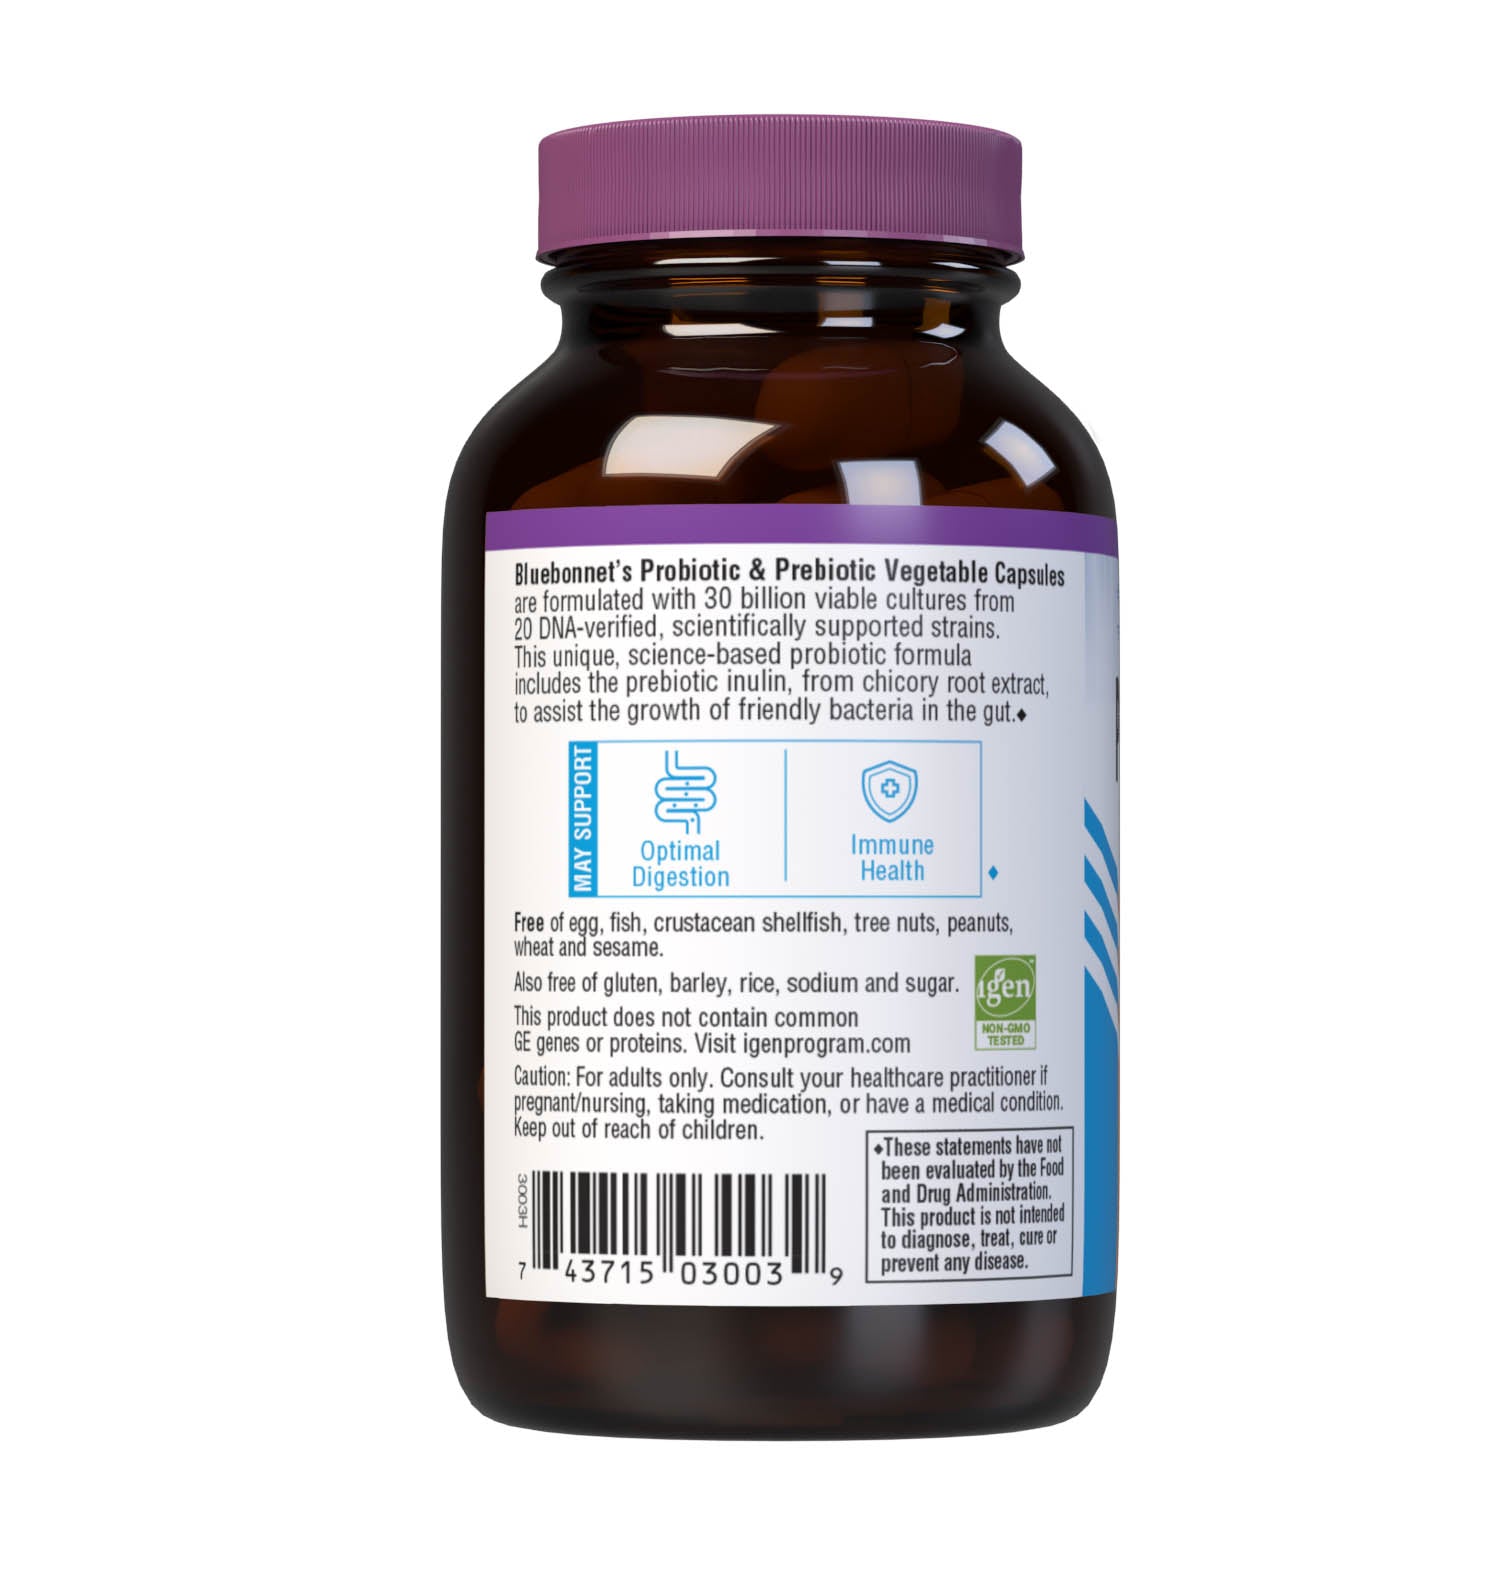 Bluebonnet’s Probiotic & Prebiotic 30 Vegetable Capsules are formulated with 30 billion viable cultures from 20 DNA-verified, scientifically supported strains. This unique, science-based probiotic formula includes the prebiotic inulin from chicory root extract, to assist the growth of friendly bacterium in the gut. Description panel. #size_30 count